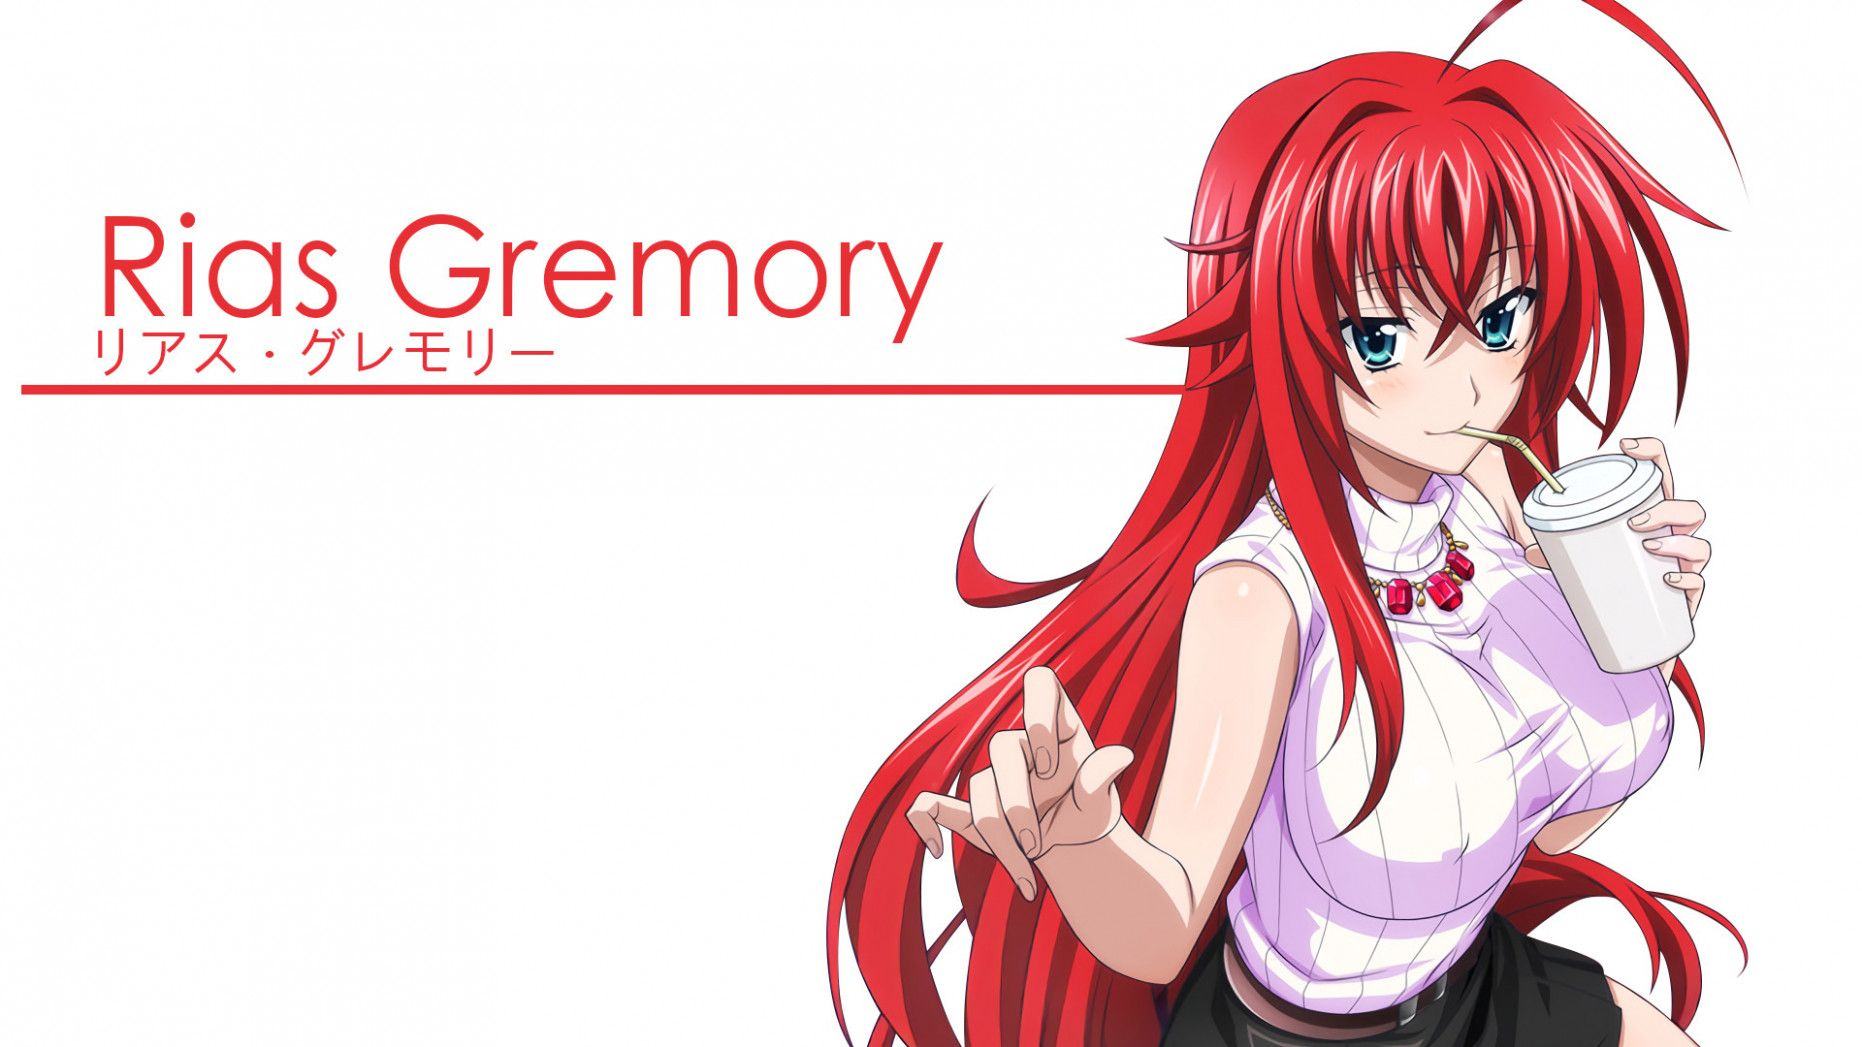 4. "Rias Gremory" from "High School DxD" - wide 1